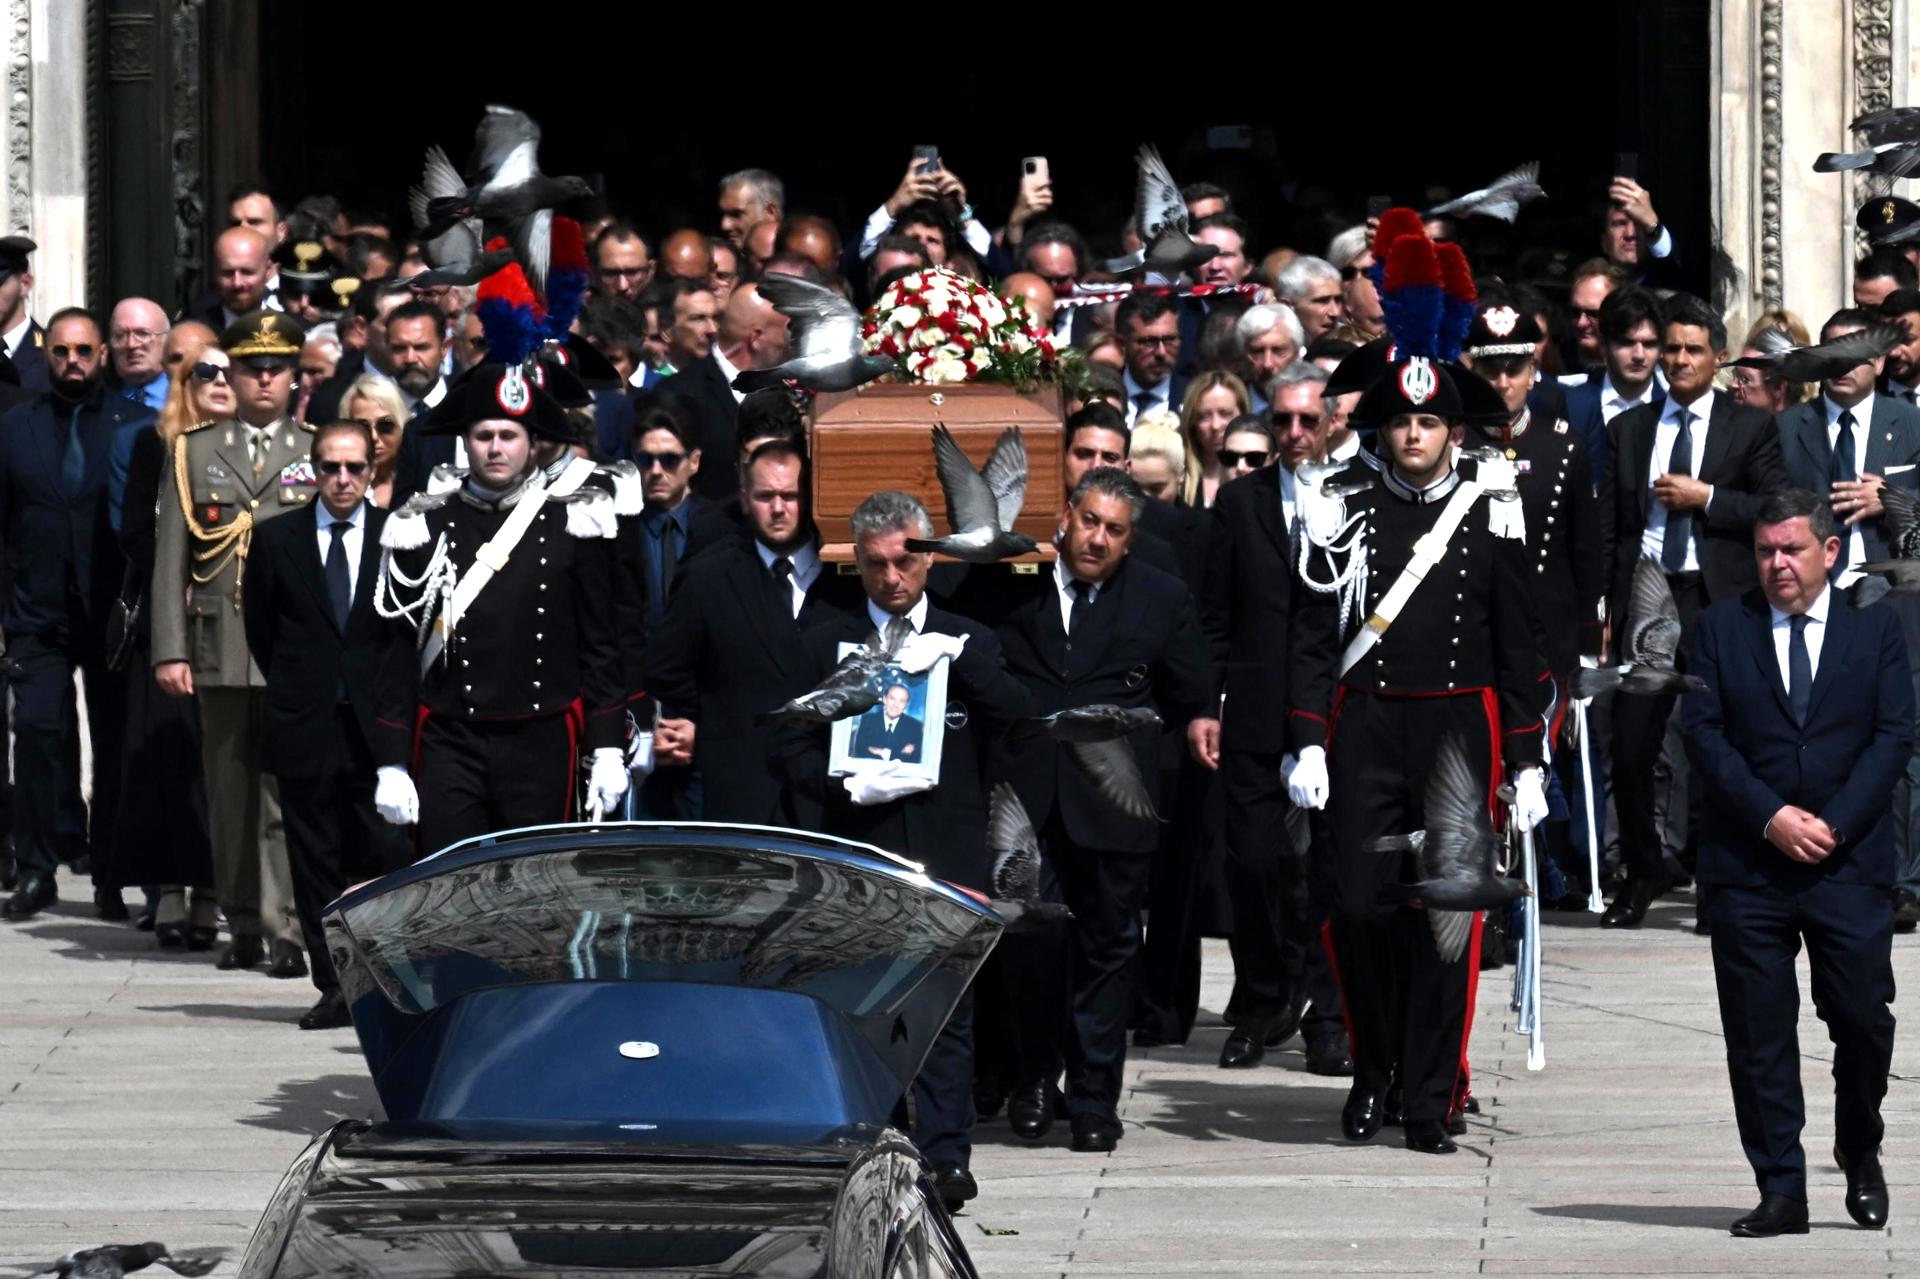 The casket of Italian politician and billionaire media magnate Silvio Berlusconi leaves the Milan Cathedral after the state funeral service on June 14, 2023. EFE/EPA/CIRO FUSCO